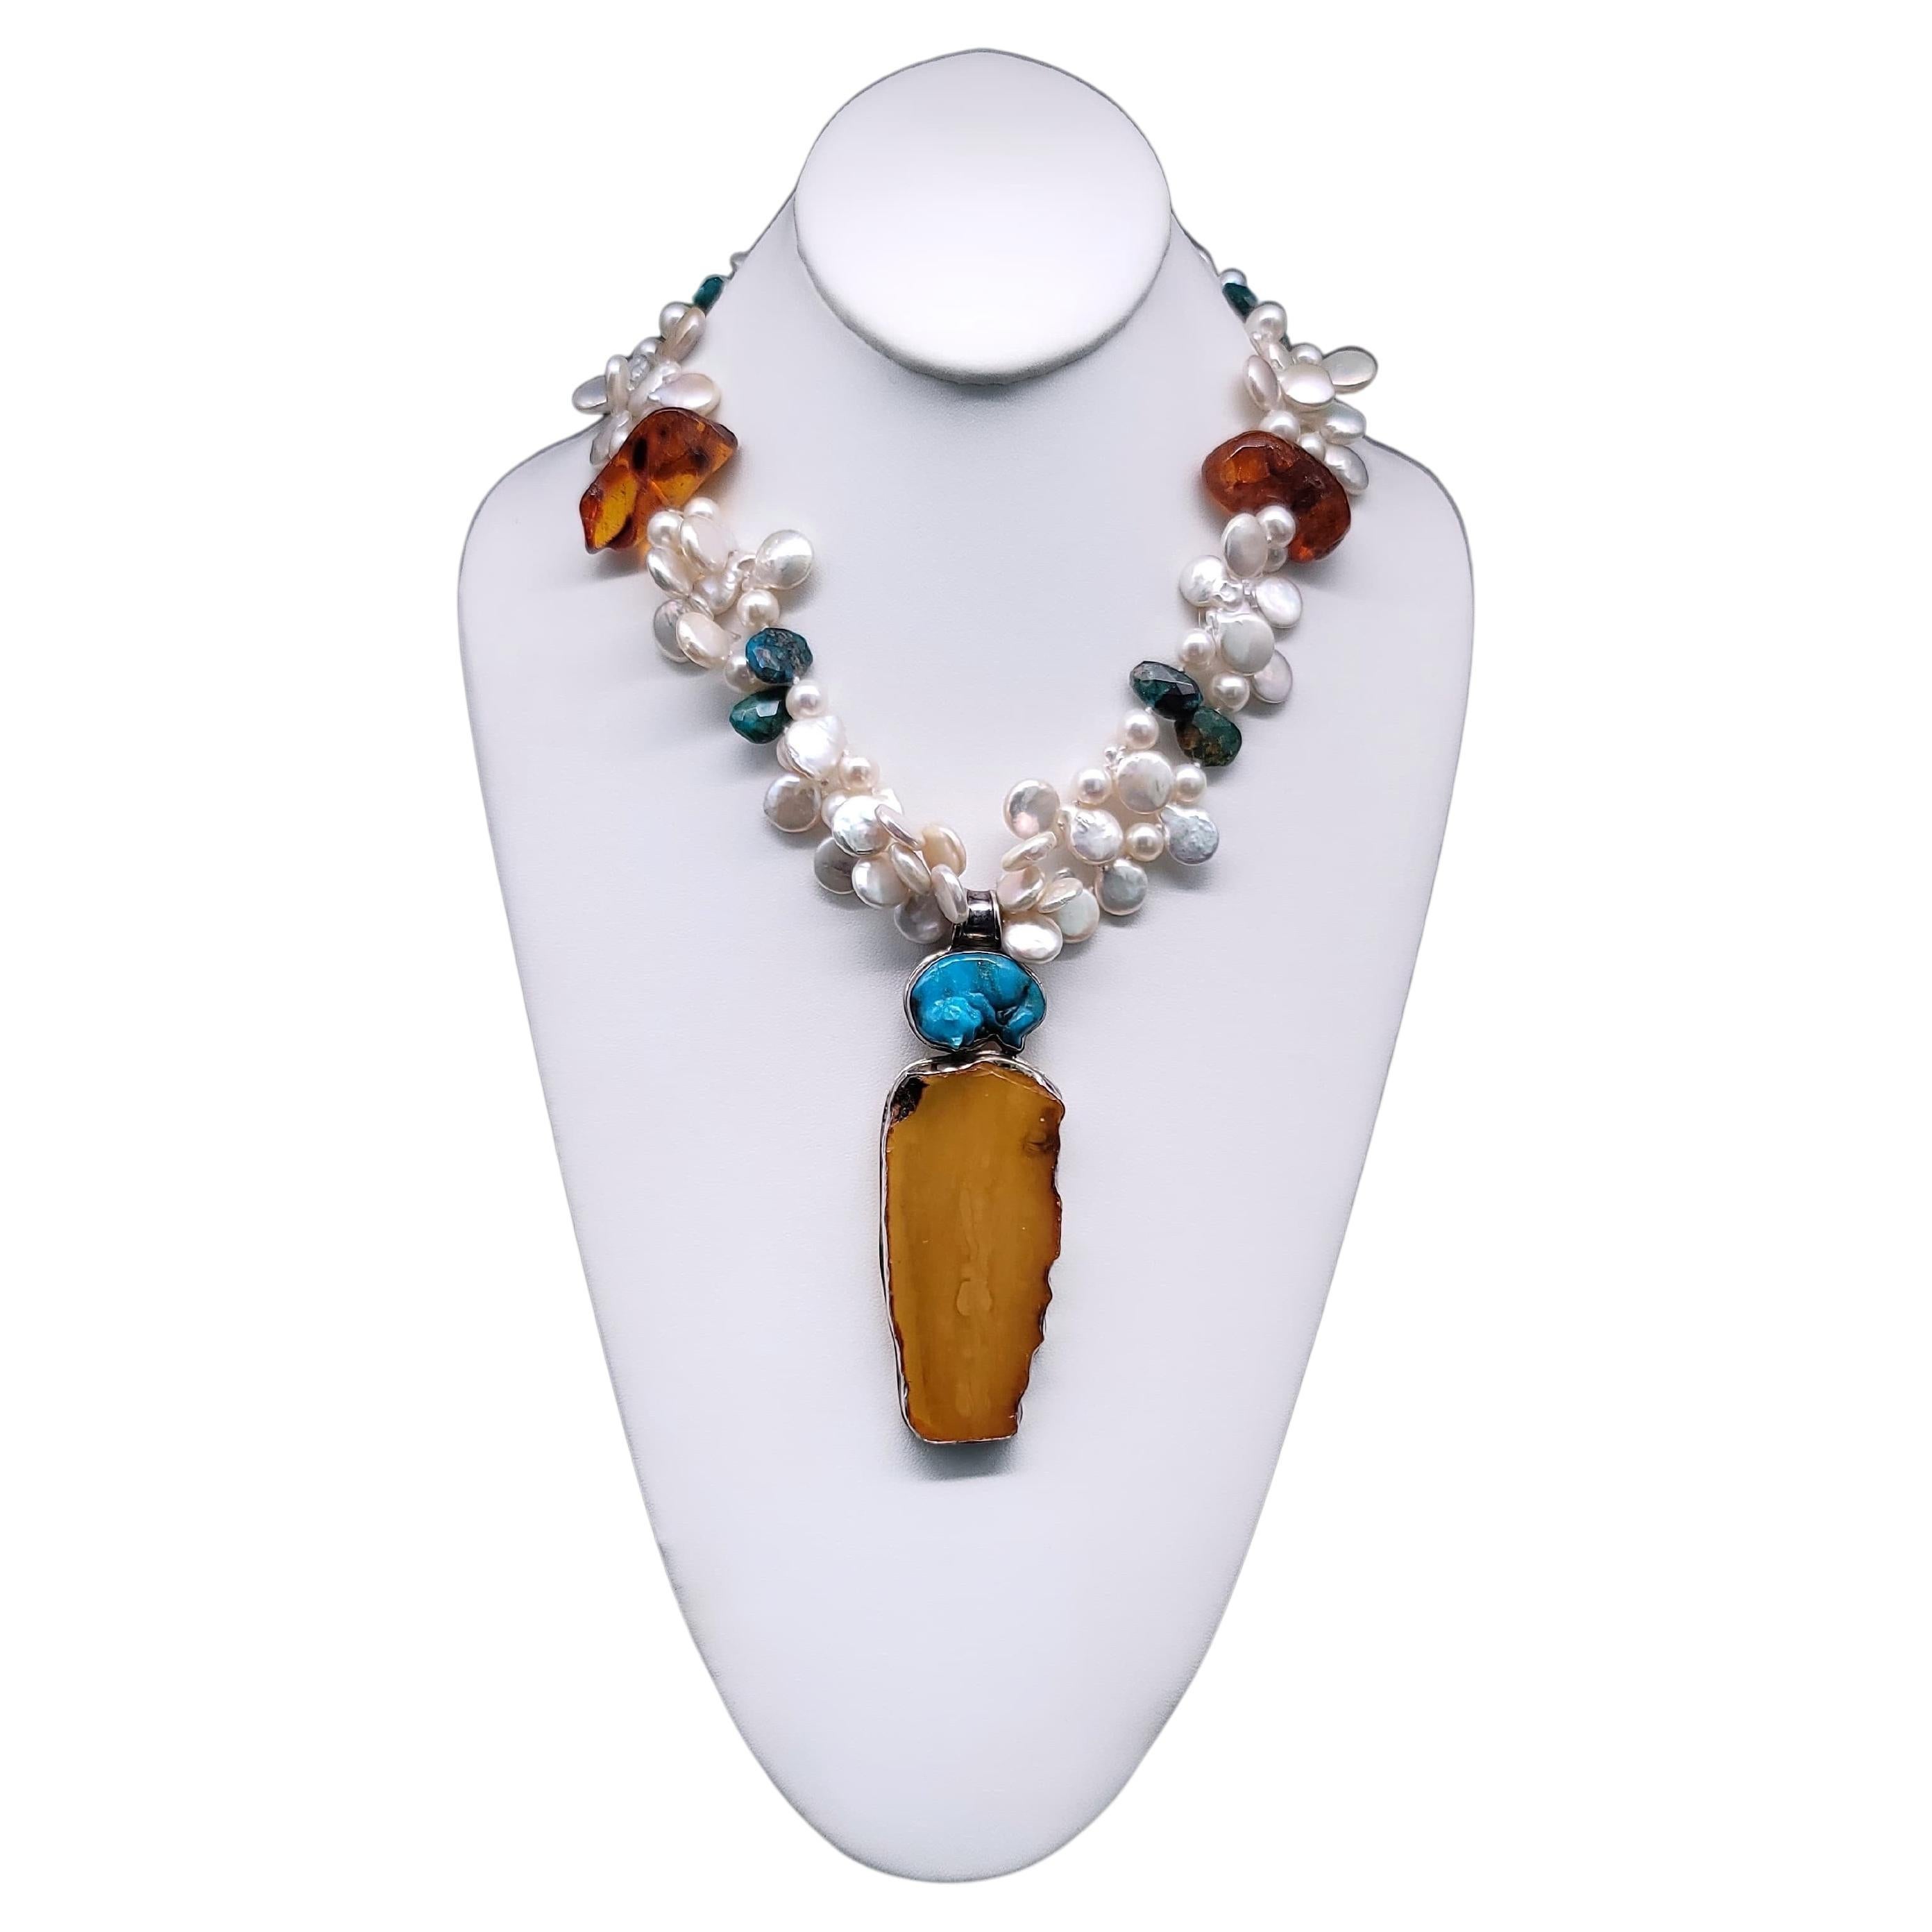 A.Jeschel Pearl necklace with spectacular Amber pendant.